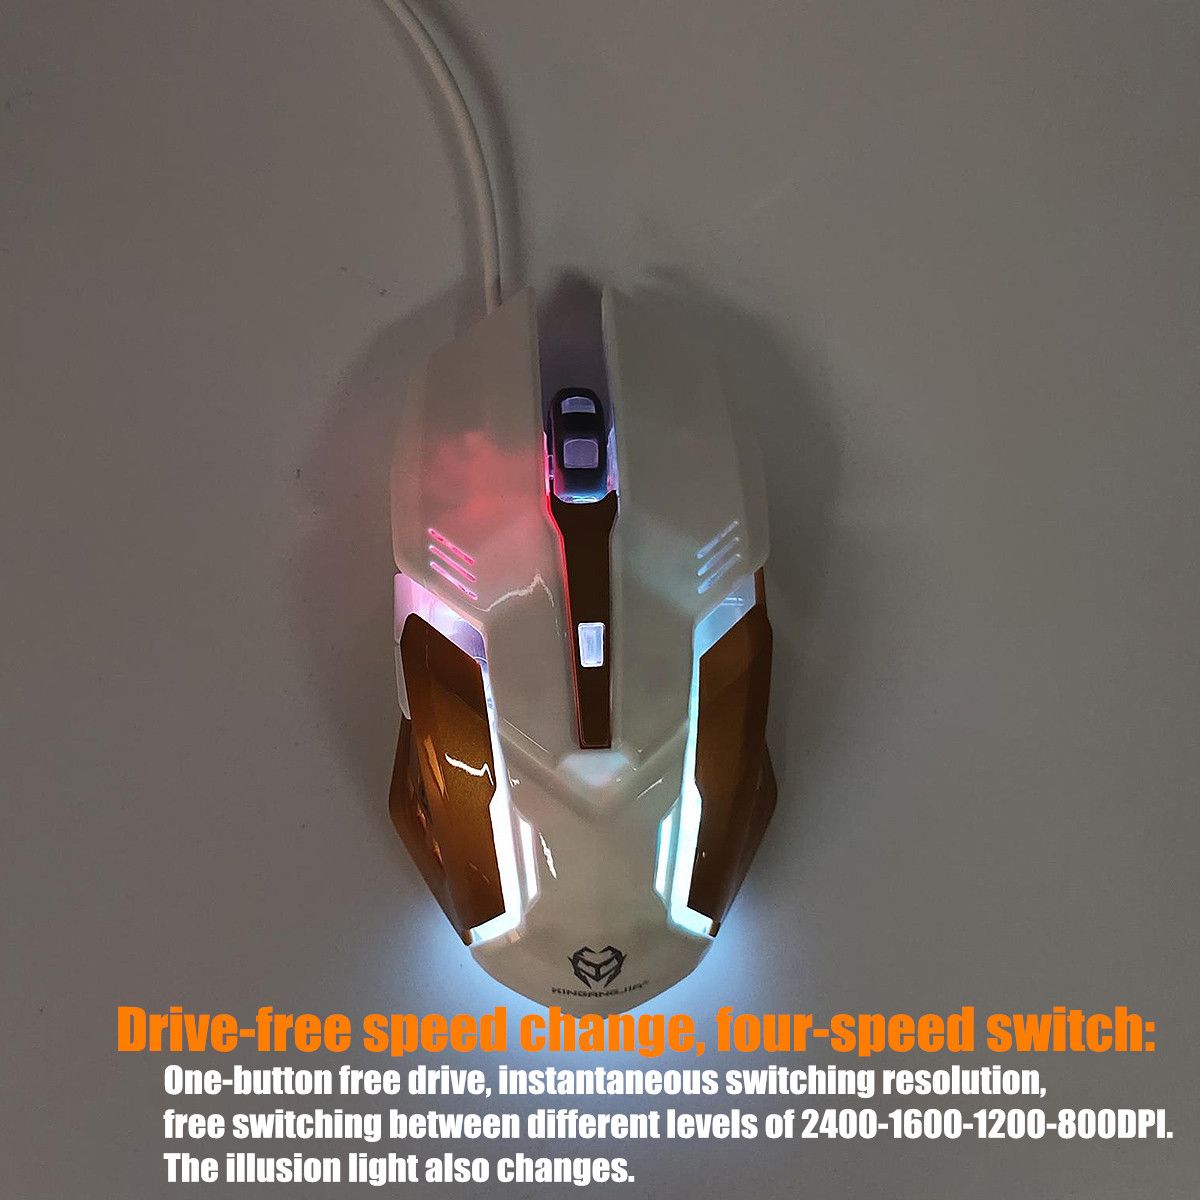 JK890-Colorful-Backlight-Alloy-Panel-USB-Wired-Gaming-Keyboard-2400DPI-LED-Gaming-Mouse-Combo-1503263